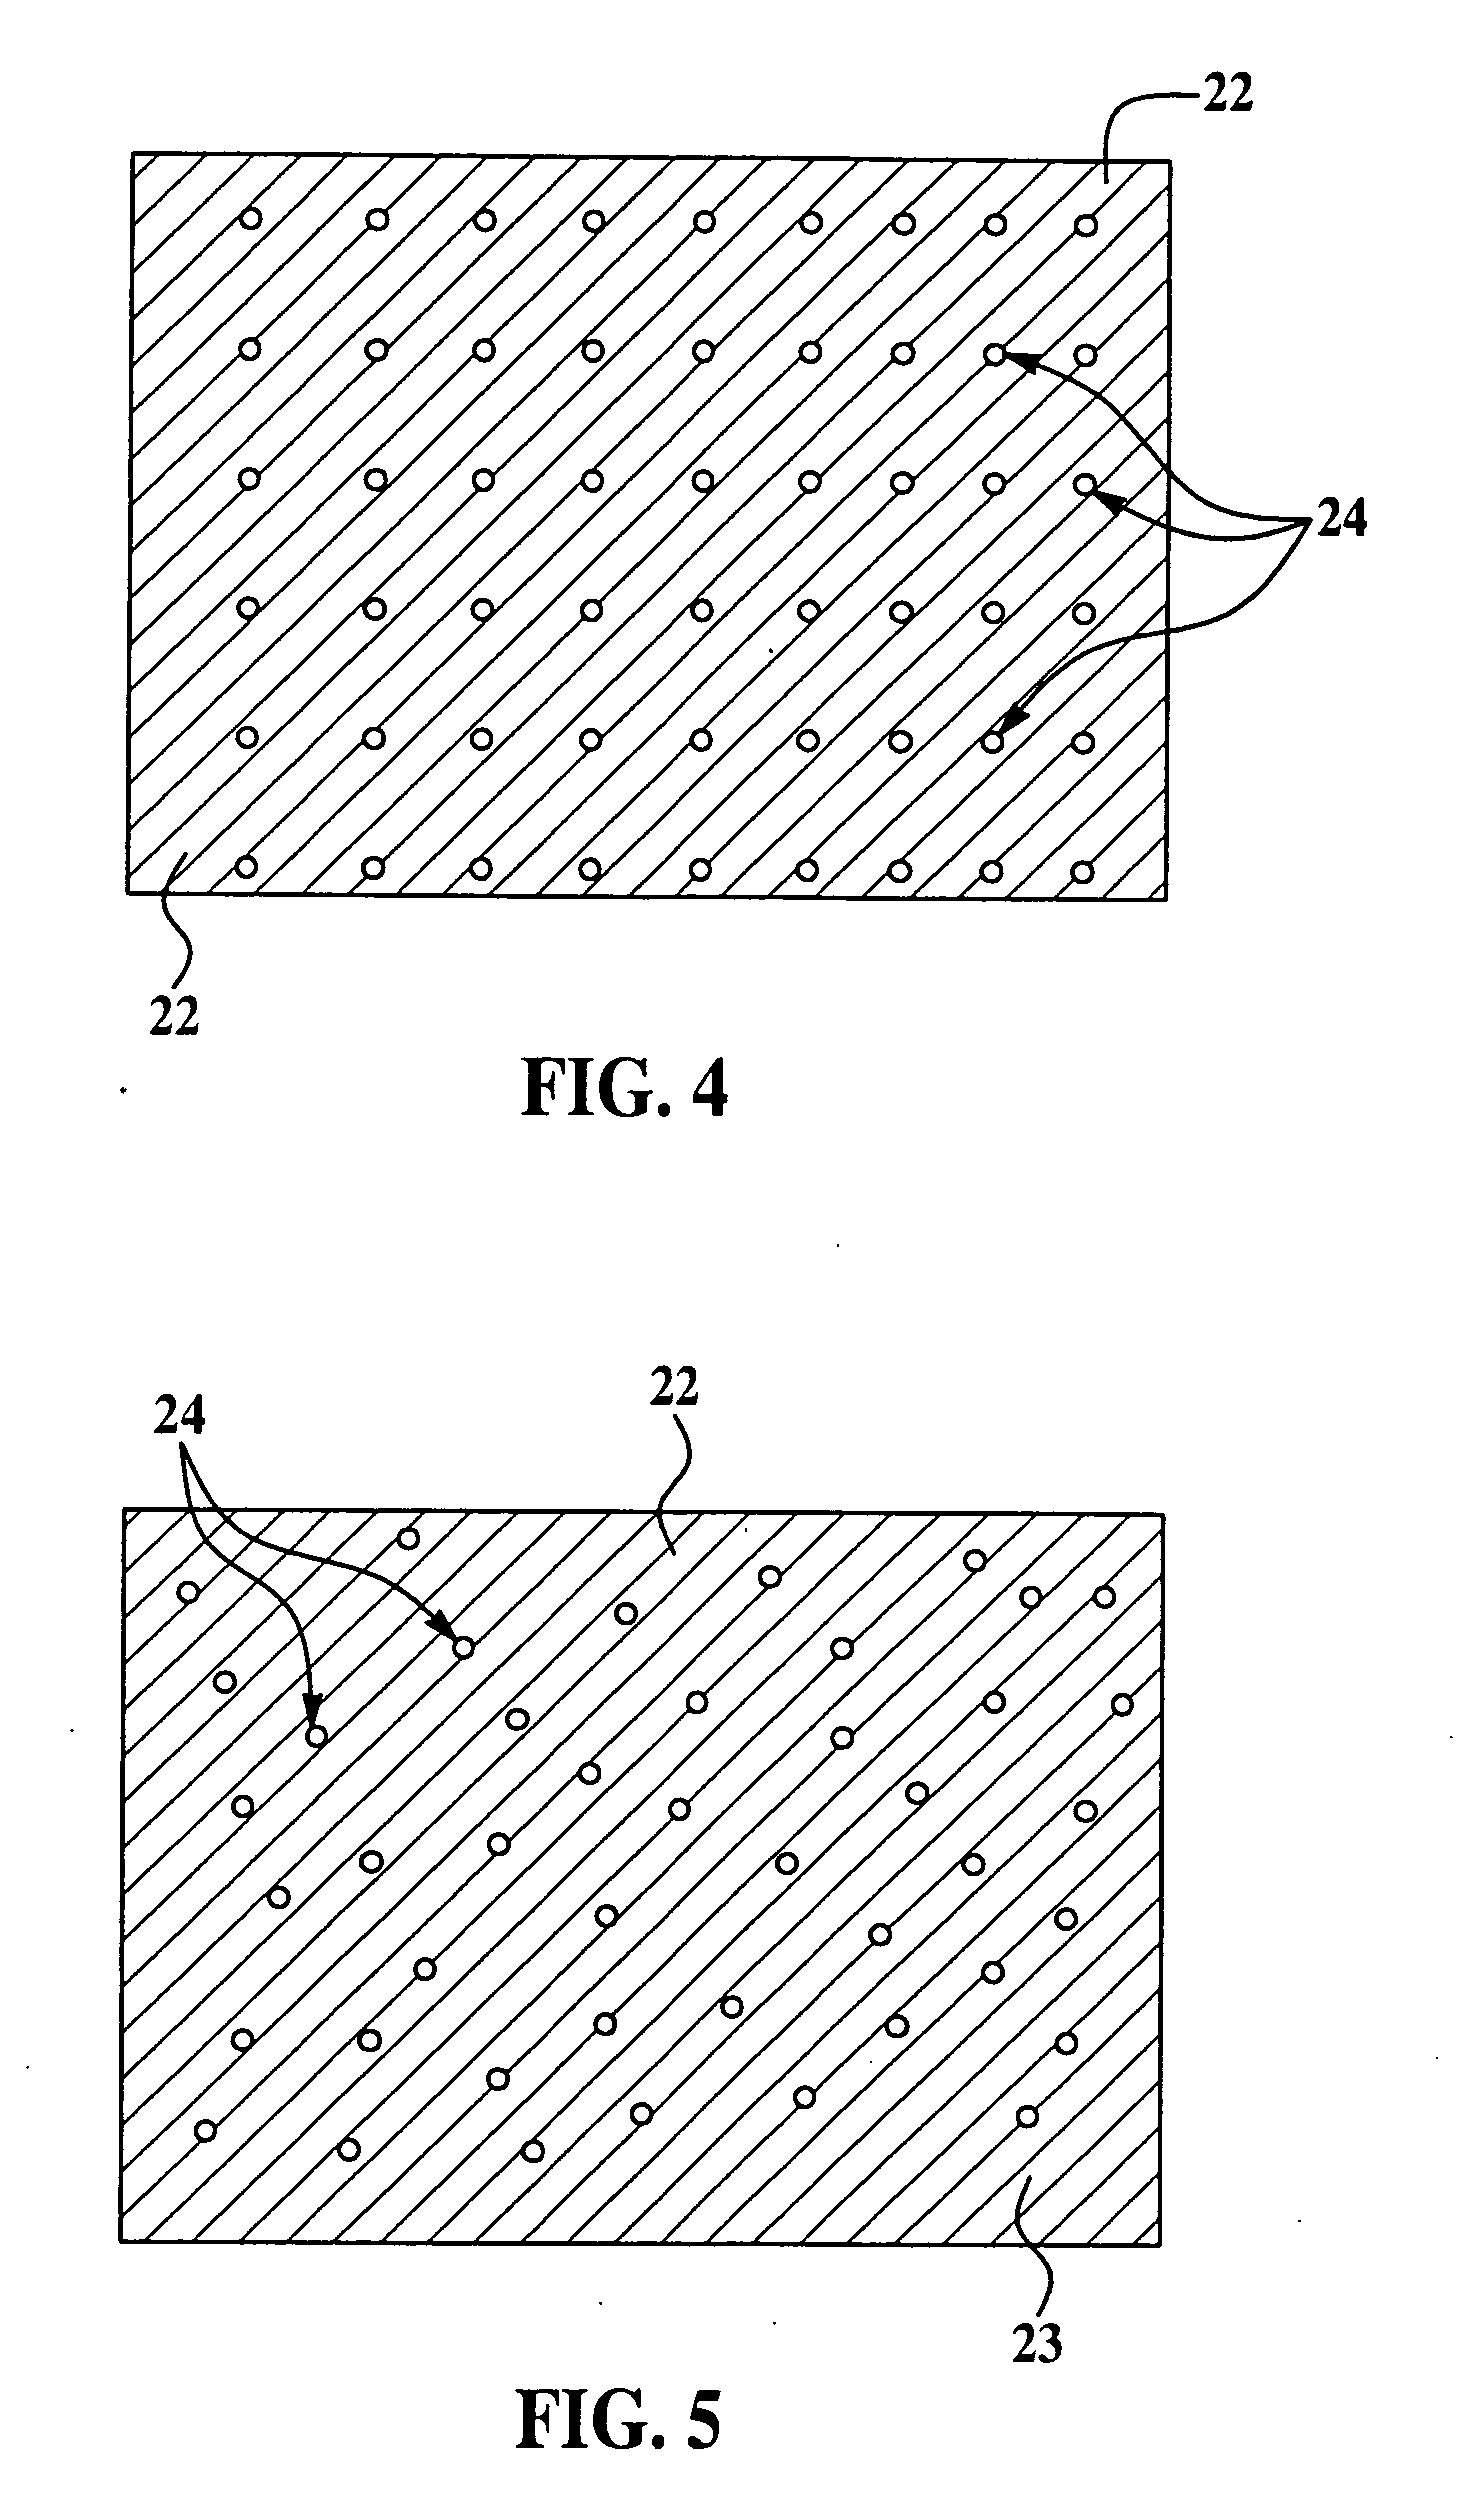 Reference standard for ultrasonic measurement of porosity and related method